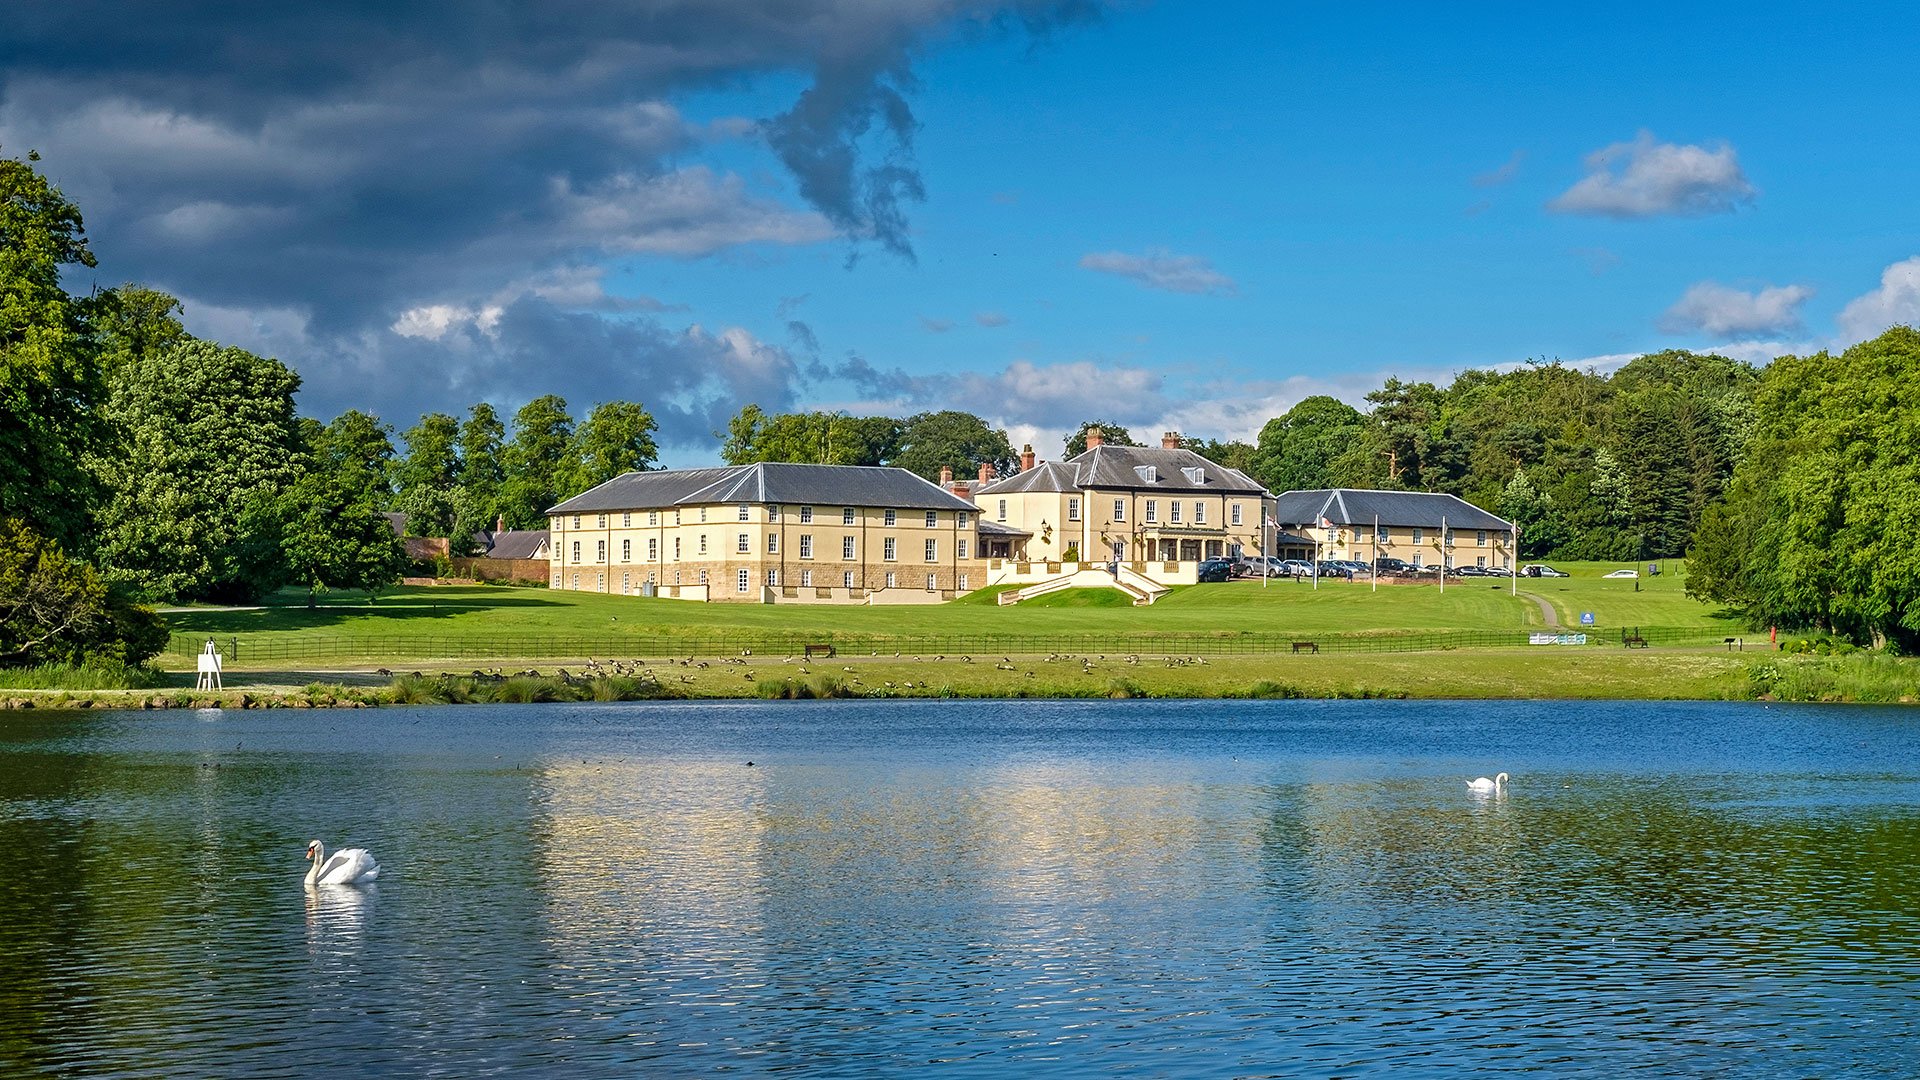 Exterior shot of the hotel from across the lake - Hardwick Hall Hotel, Sedgefield